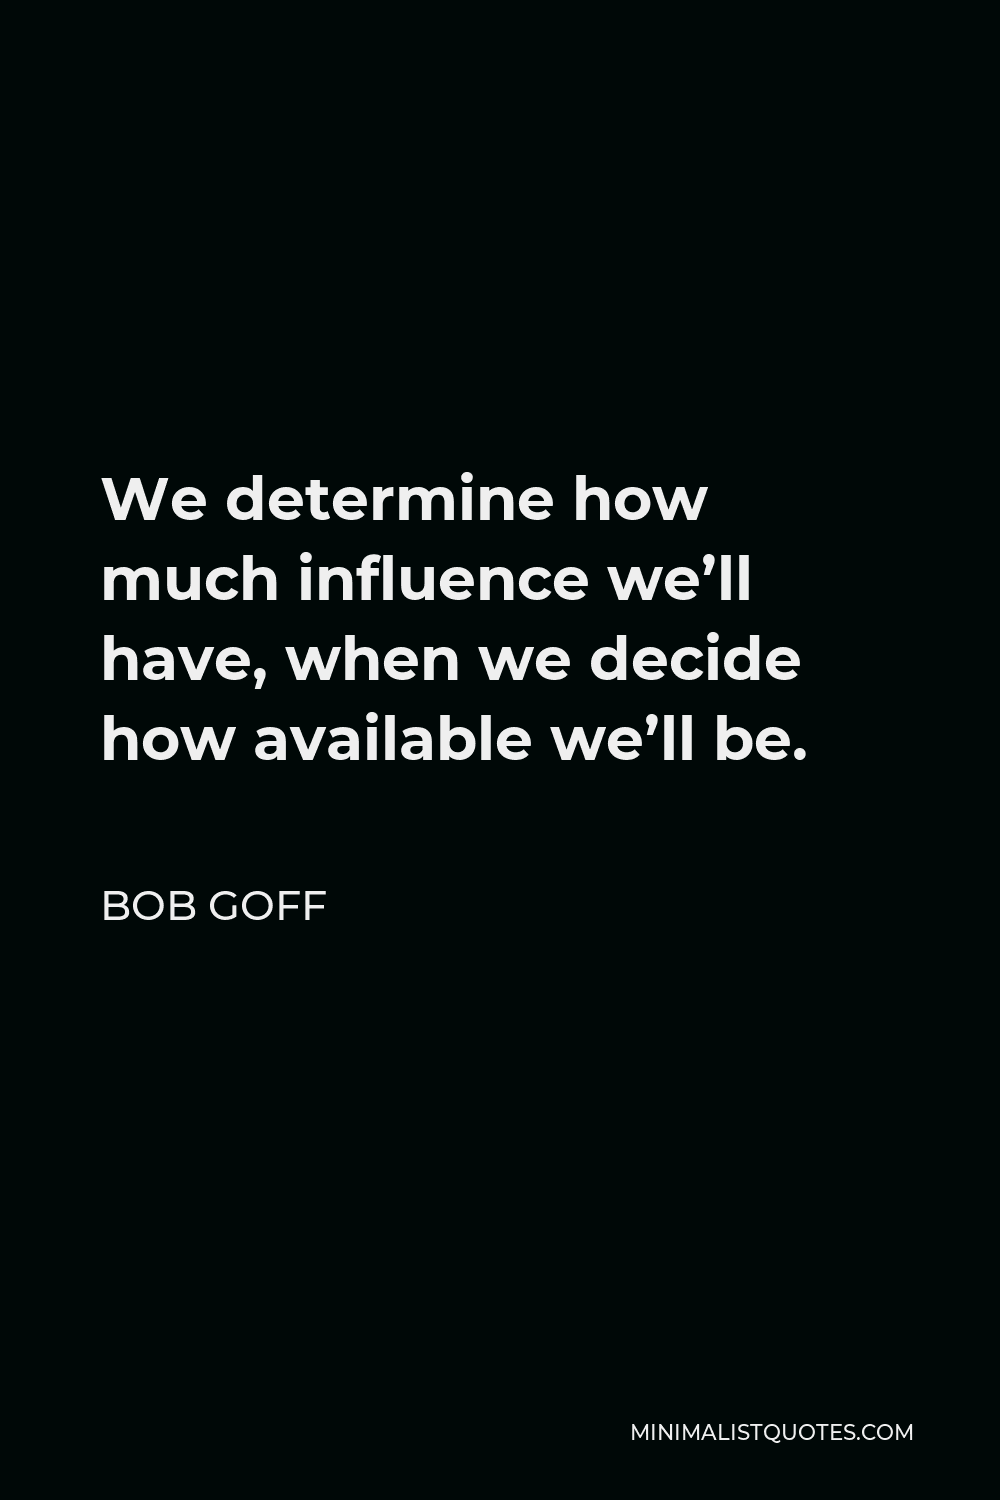 Bob Goff Quote - We determine how much influence we’ll have, when we decide how available we’ll be.